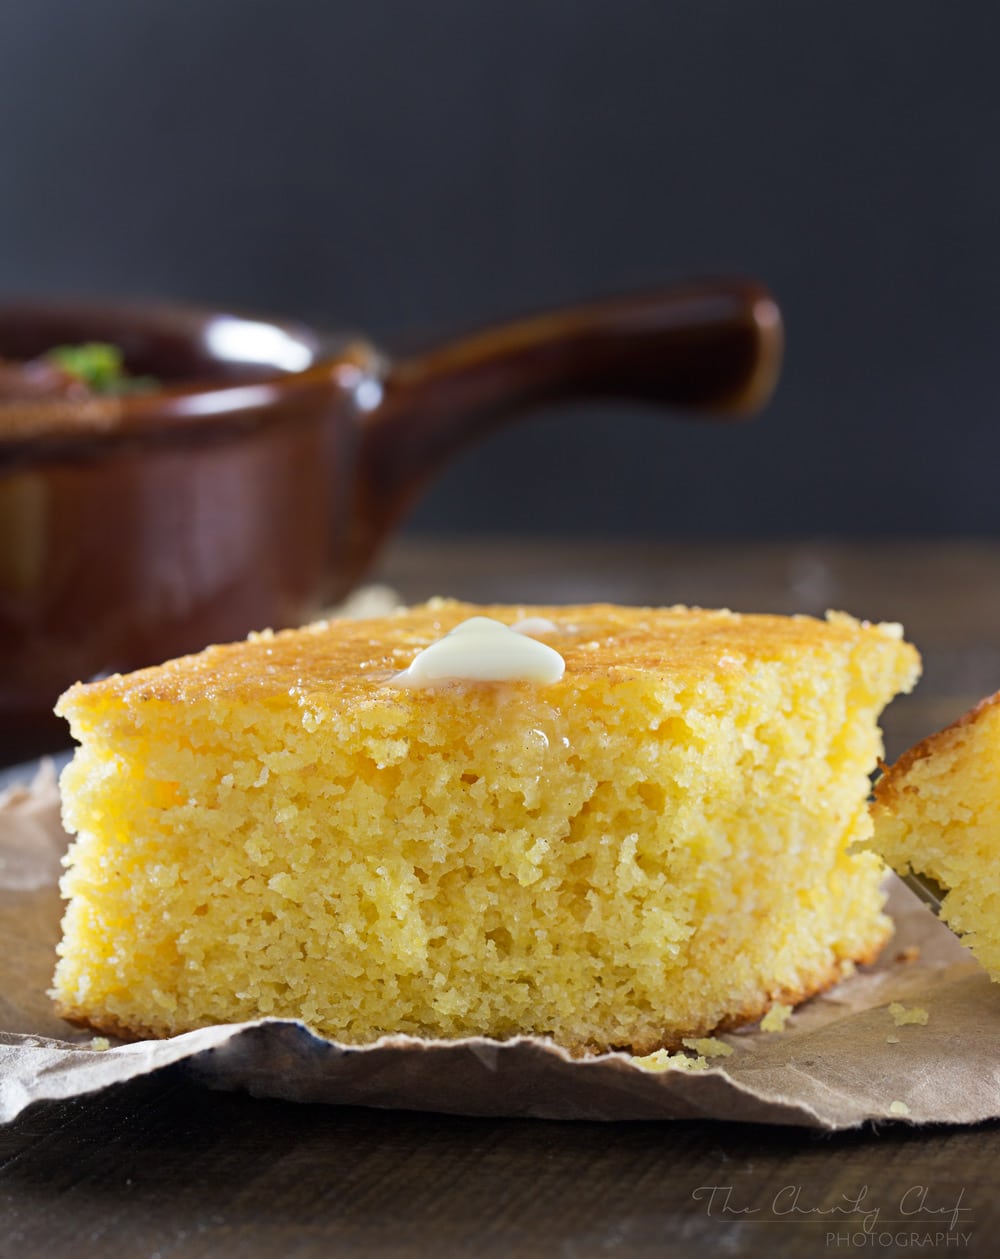 Homestyle Cornbread | This homestyle cornbread is a perfect mix of savory southern cornbread and sweet northern cornbread... fluffy and soft, it's the only recipe you'll need! | http://thechunkychef.com